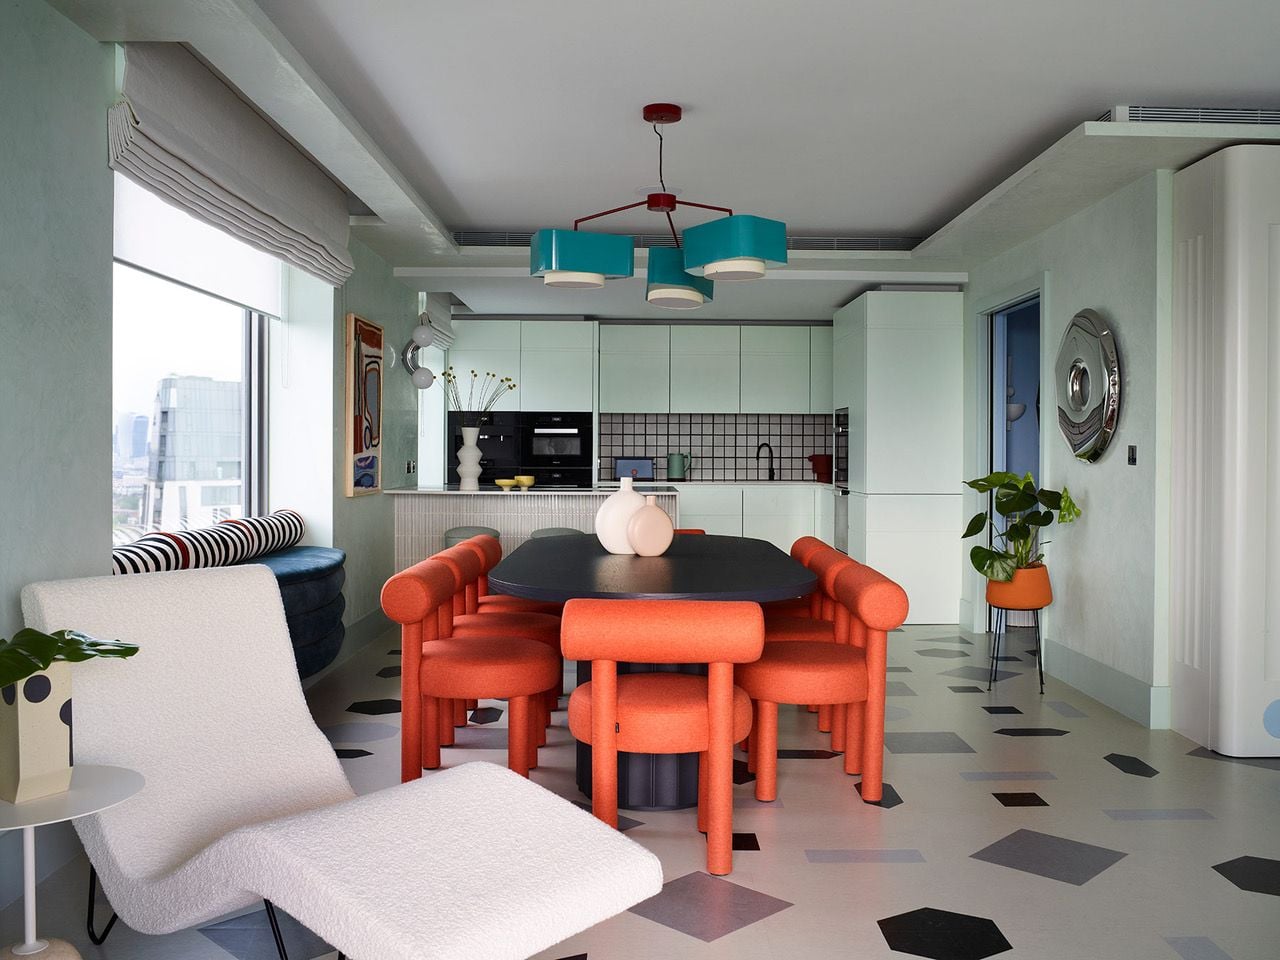 Chic, contemporary kitchen space inside Owl Interior Design's Bowie-inspired London apartment. 